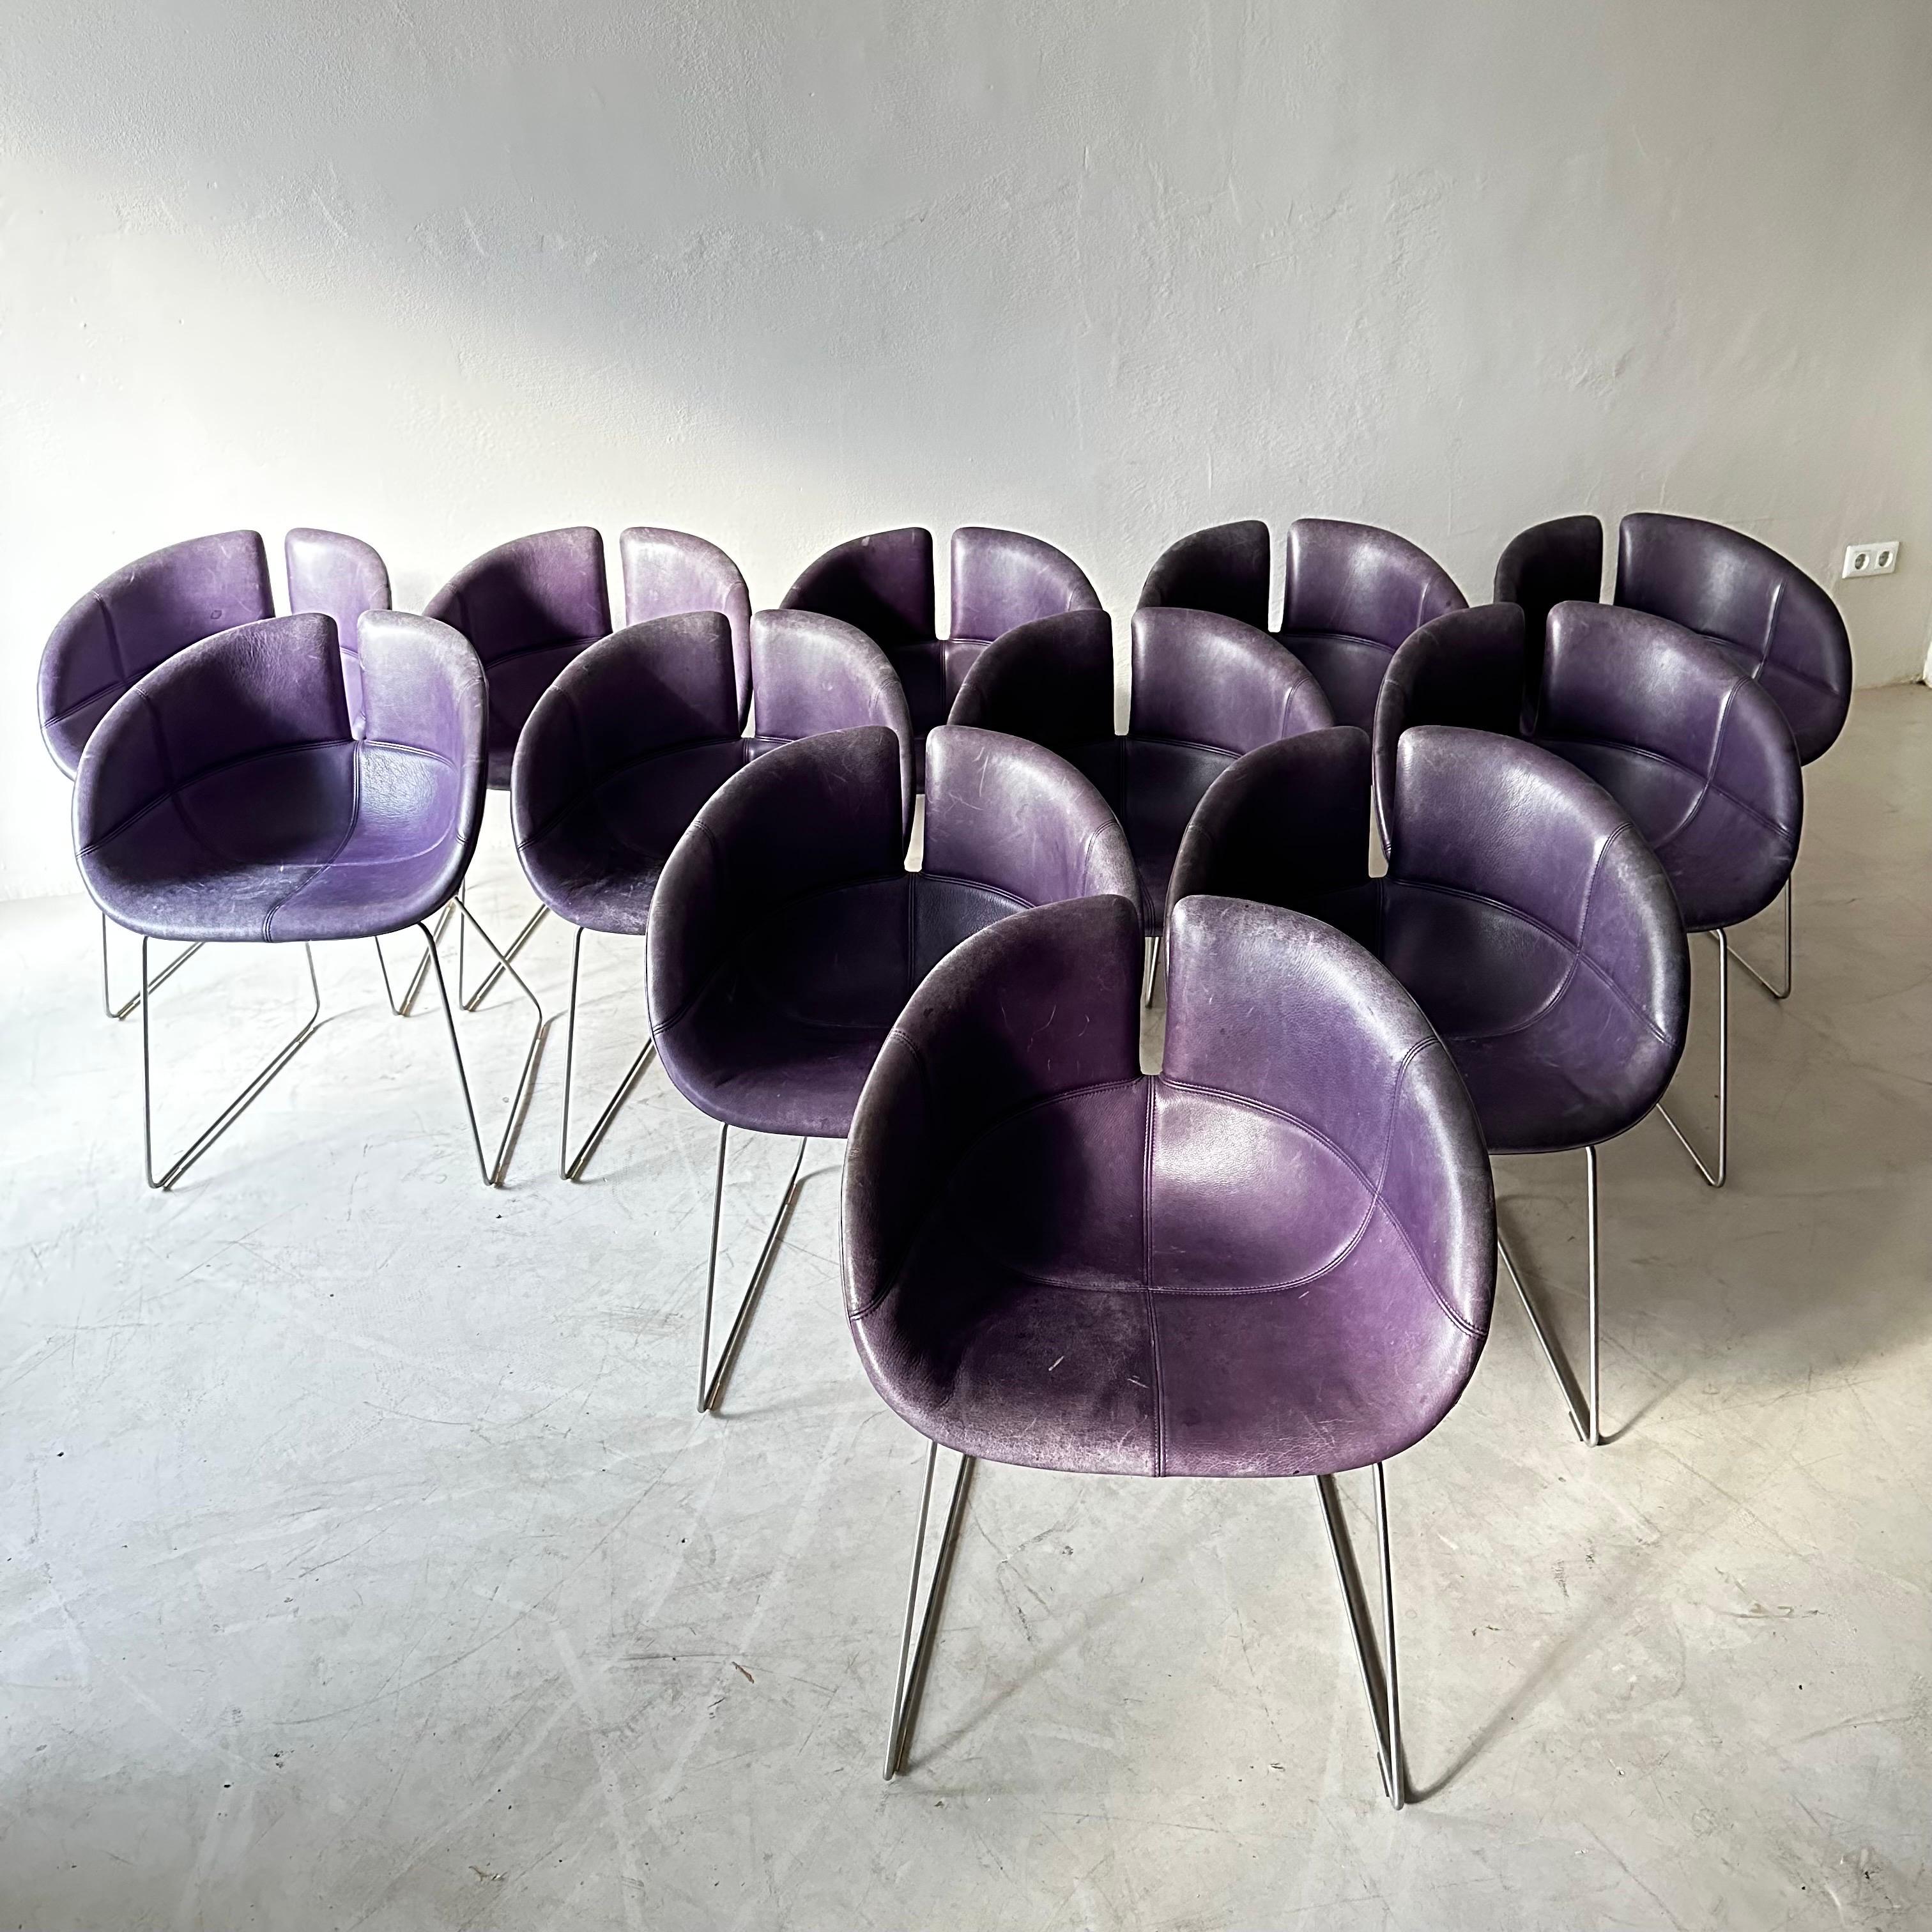 Fjord Dining Arm Chair is designed by Patricia Urquiola for Moroso. Upholstery in original patinated purple leather. Price is for the set of 12 chairs.